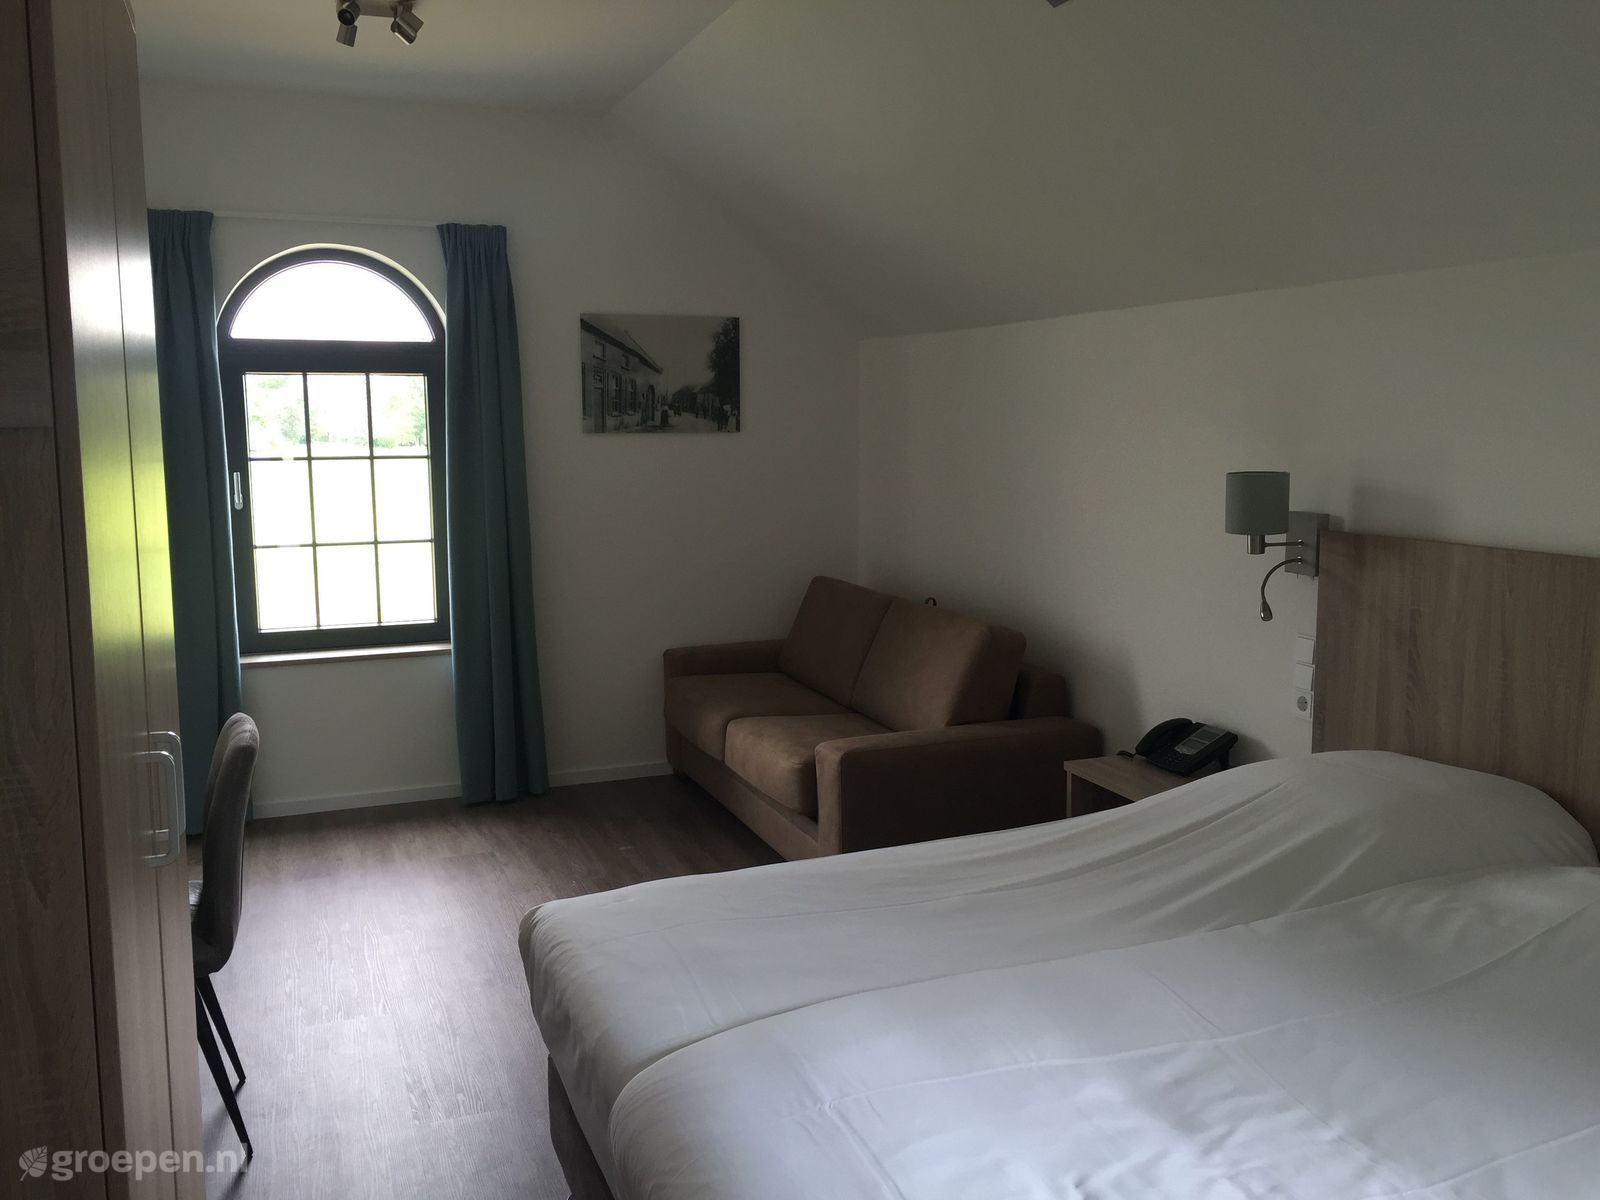 Group accommodation Appeltern